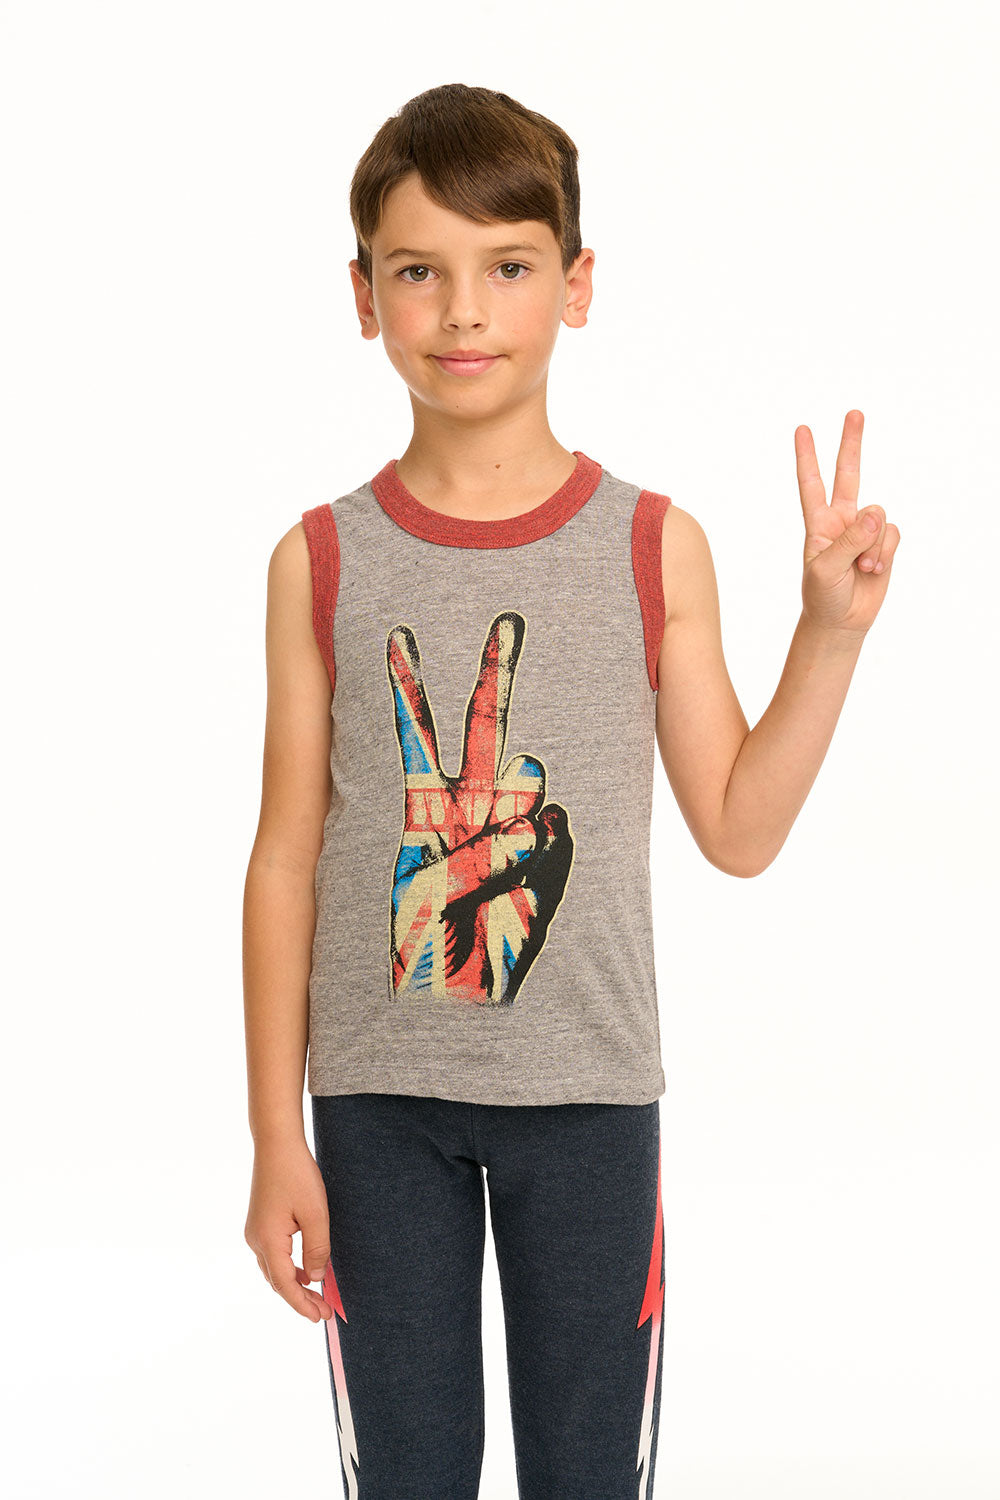 The Who - Peace Tank BOYS chaserbrand